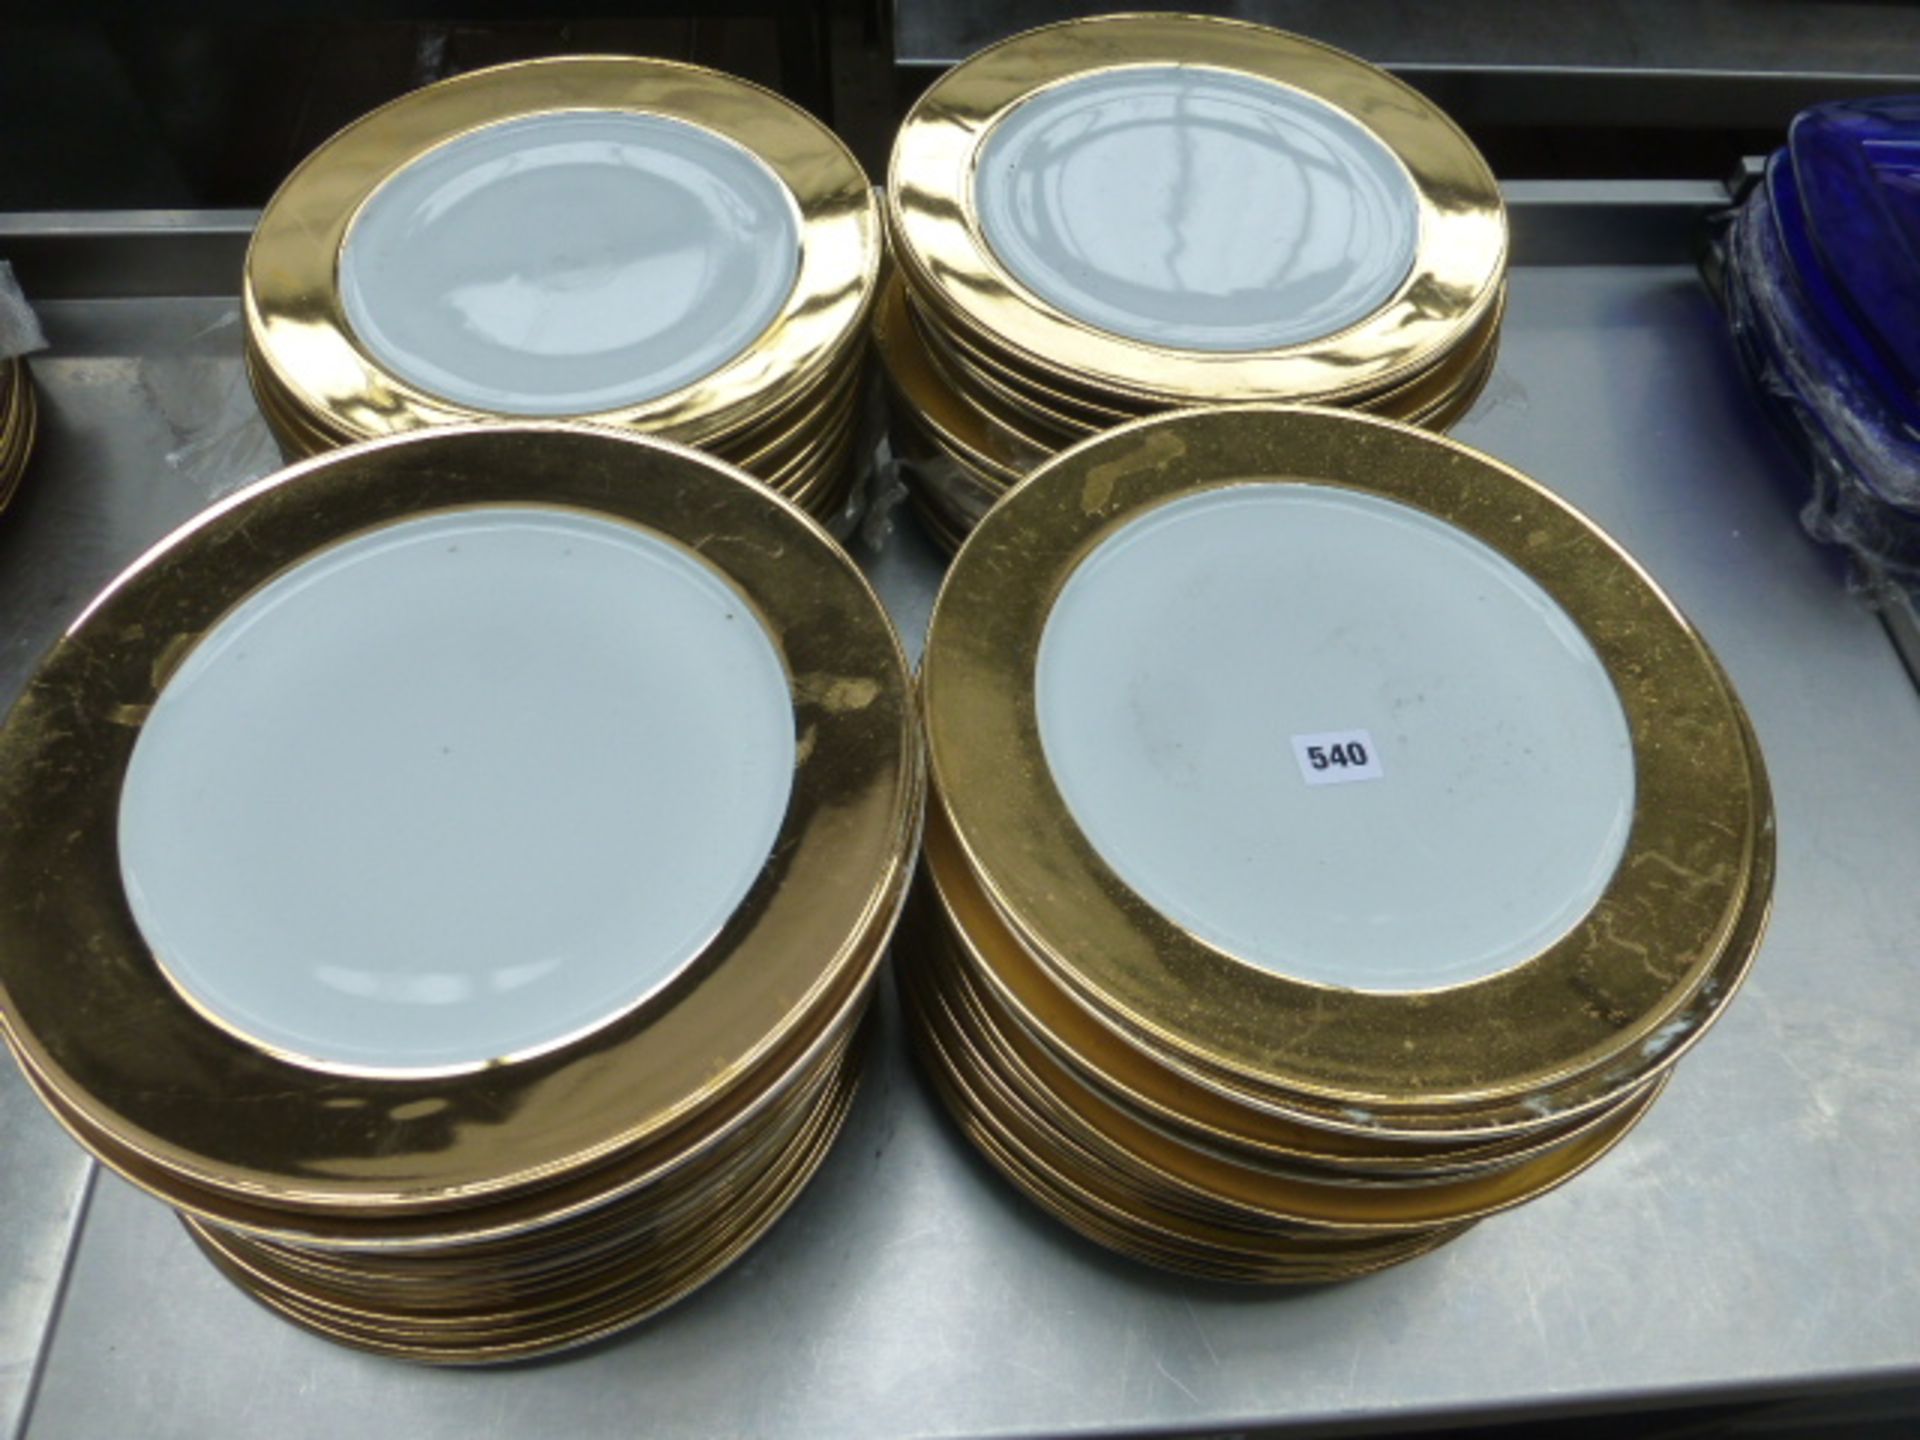 Approx. 50 John Gor North and other make 12'' white plates with gold rims